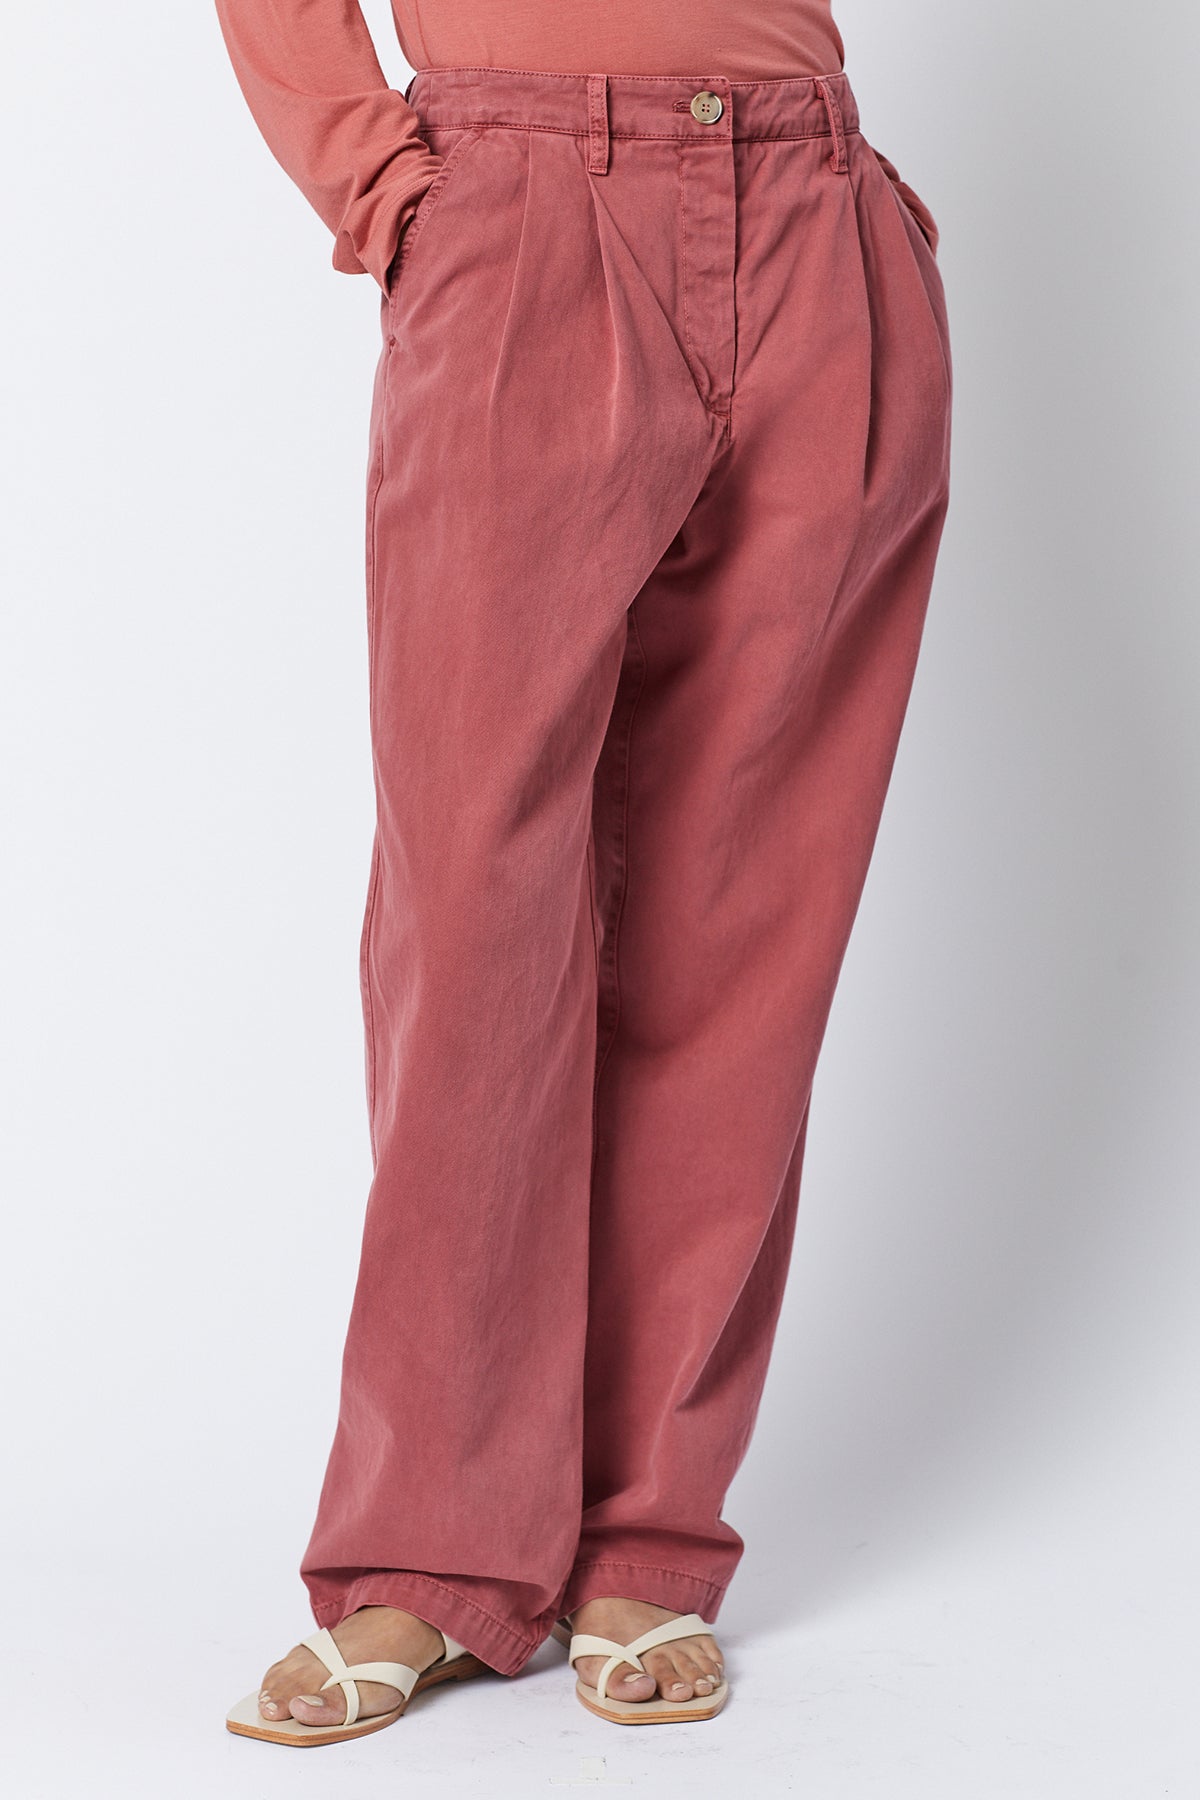 Temescal Pant in femme front-26007132078273